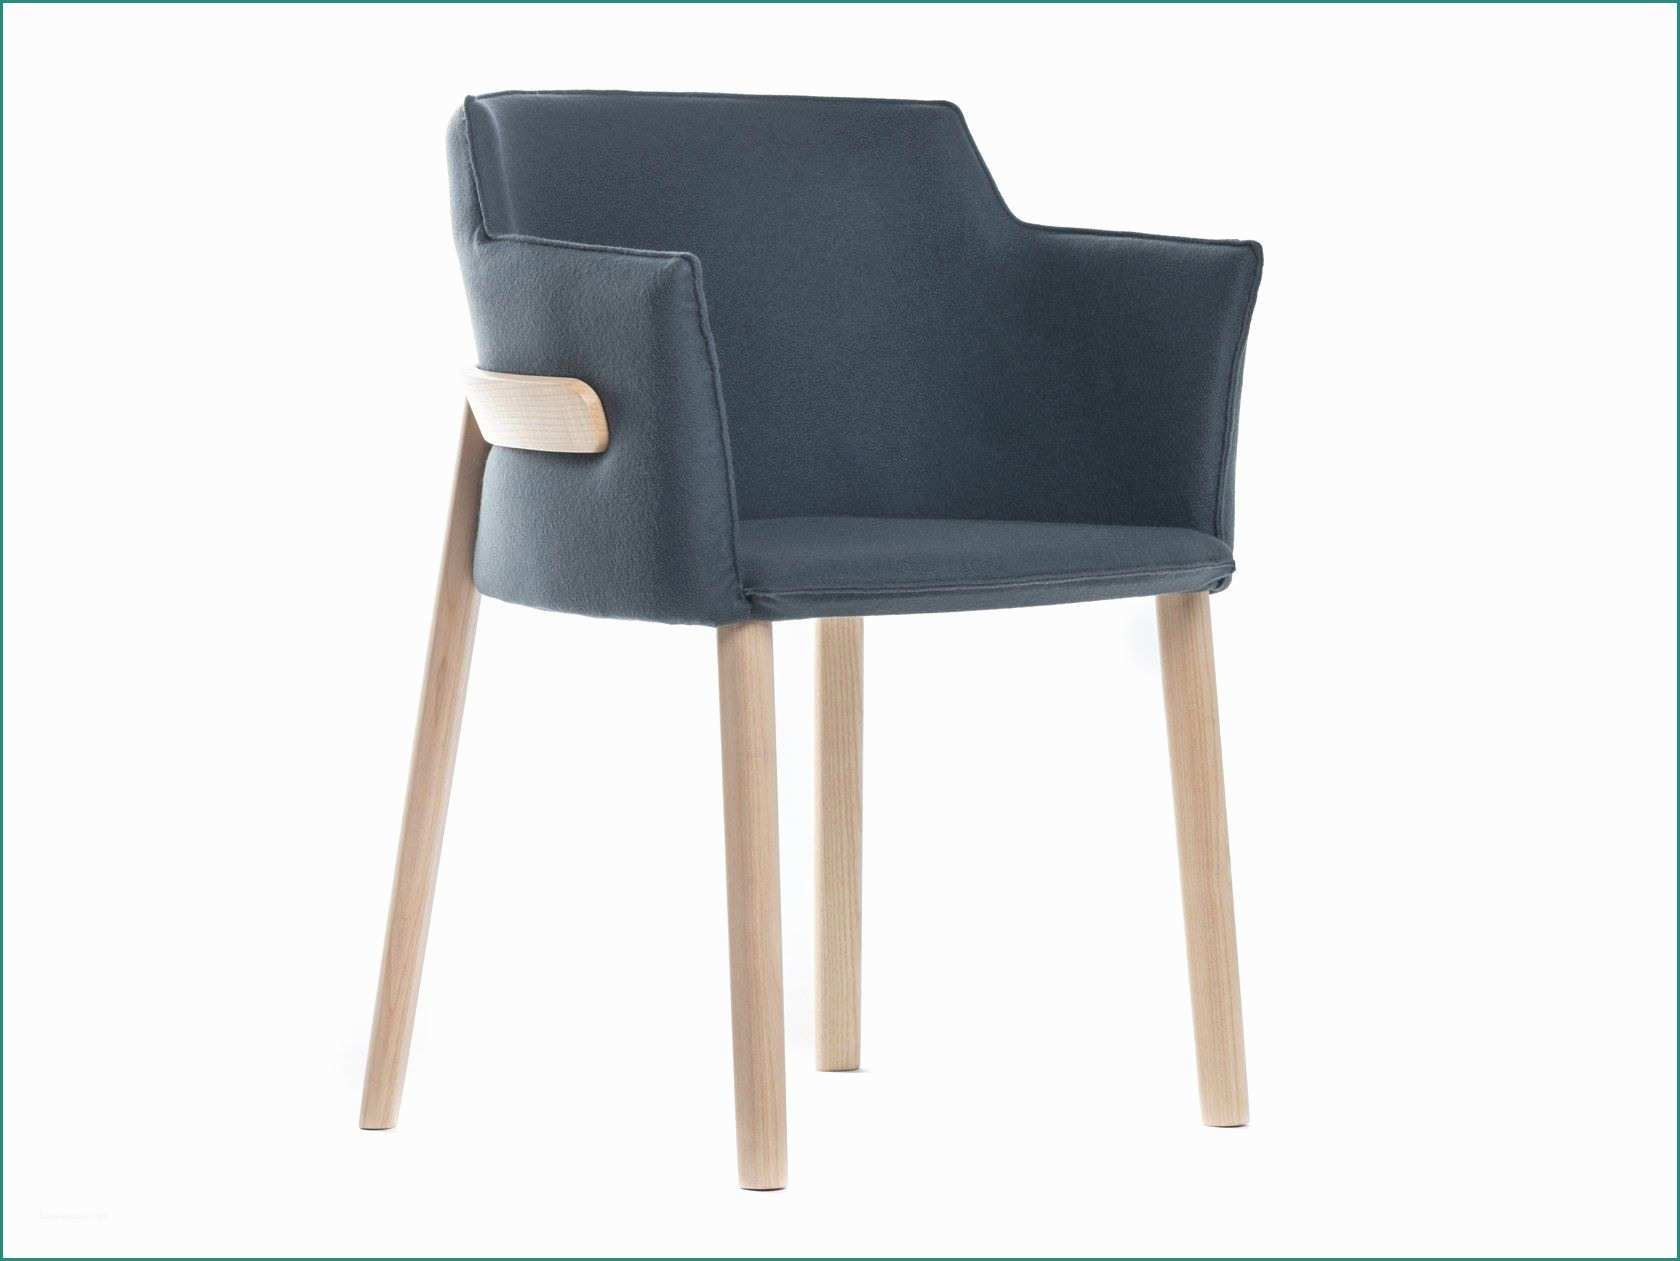 Poltrona A Dondolo E Upholstered Fabric Chair with Armrests Pince by Wiener Gtv Design